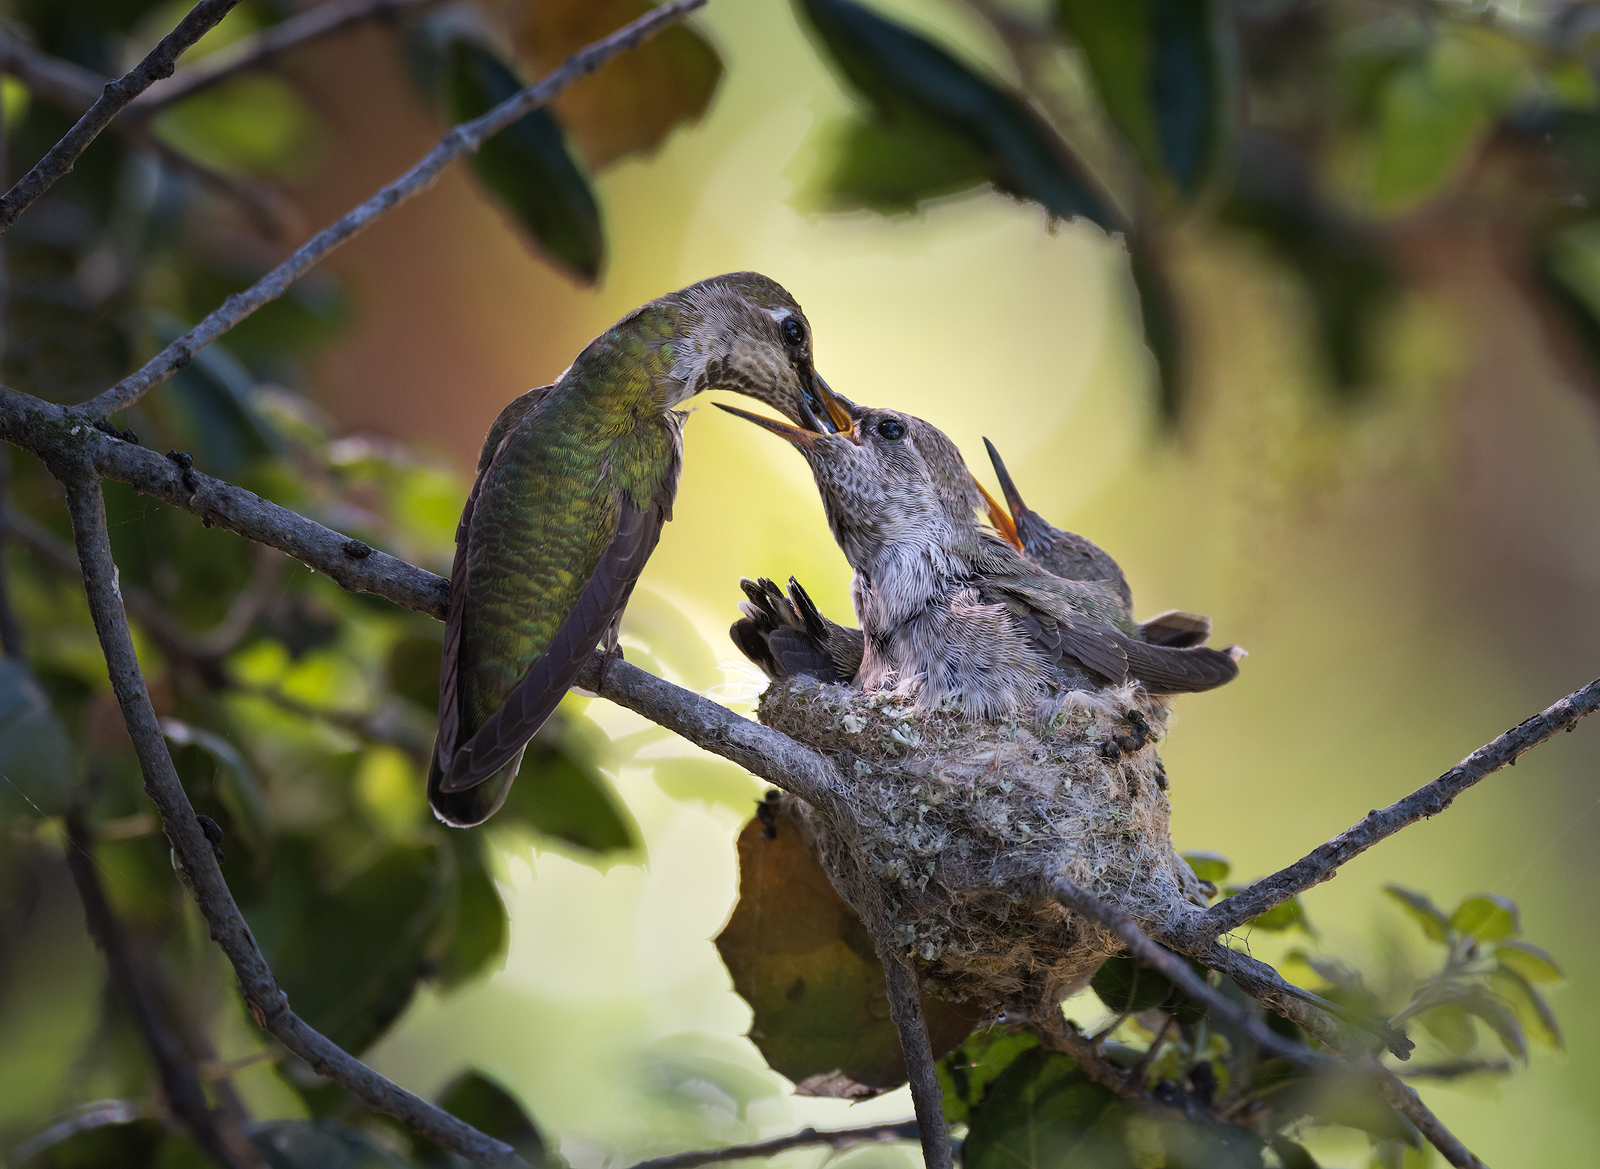 Female Anna's hummingbird (Calypte anna) feeds her young by lowering her bill into their open mouths and regurgitating a mixture of nectar and insects. She will feed them about 4-6 times an hour.